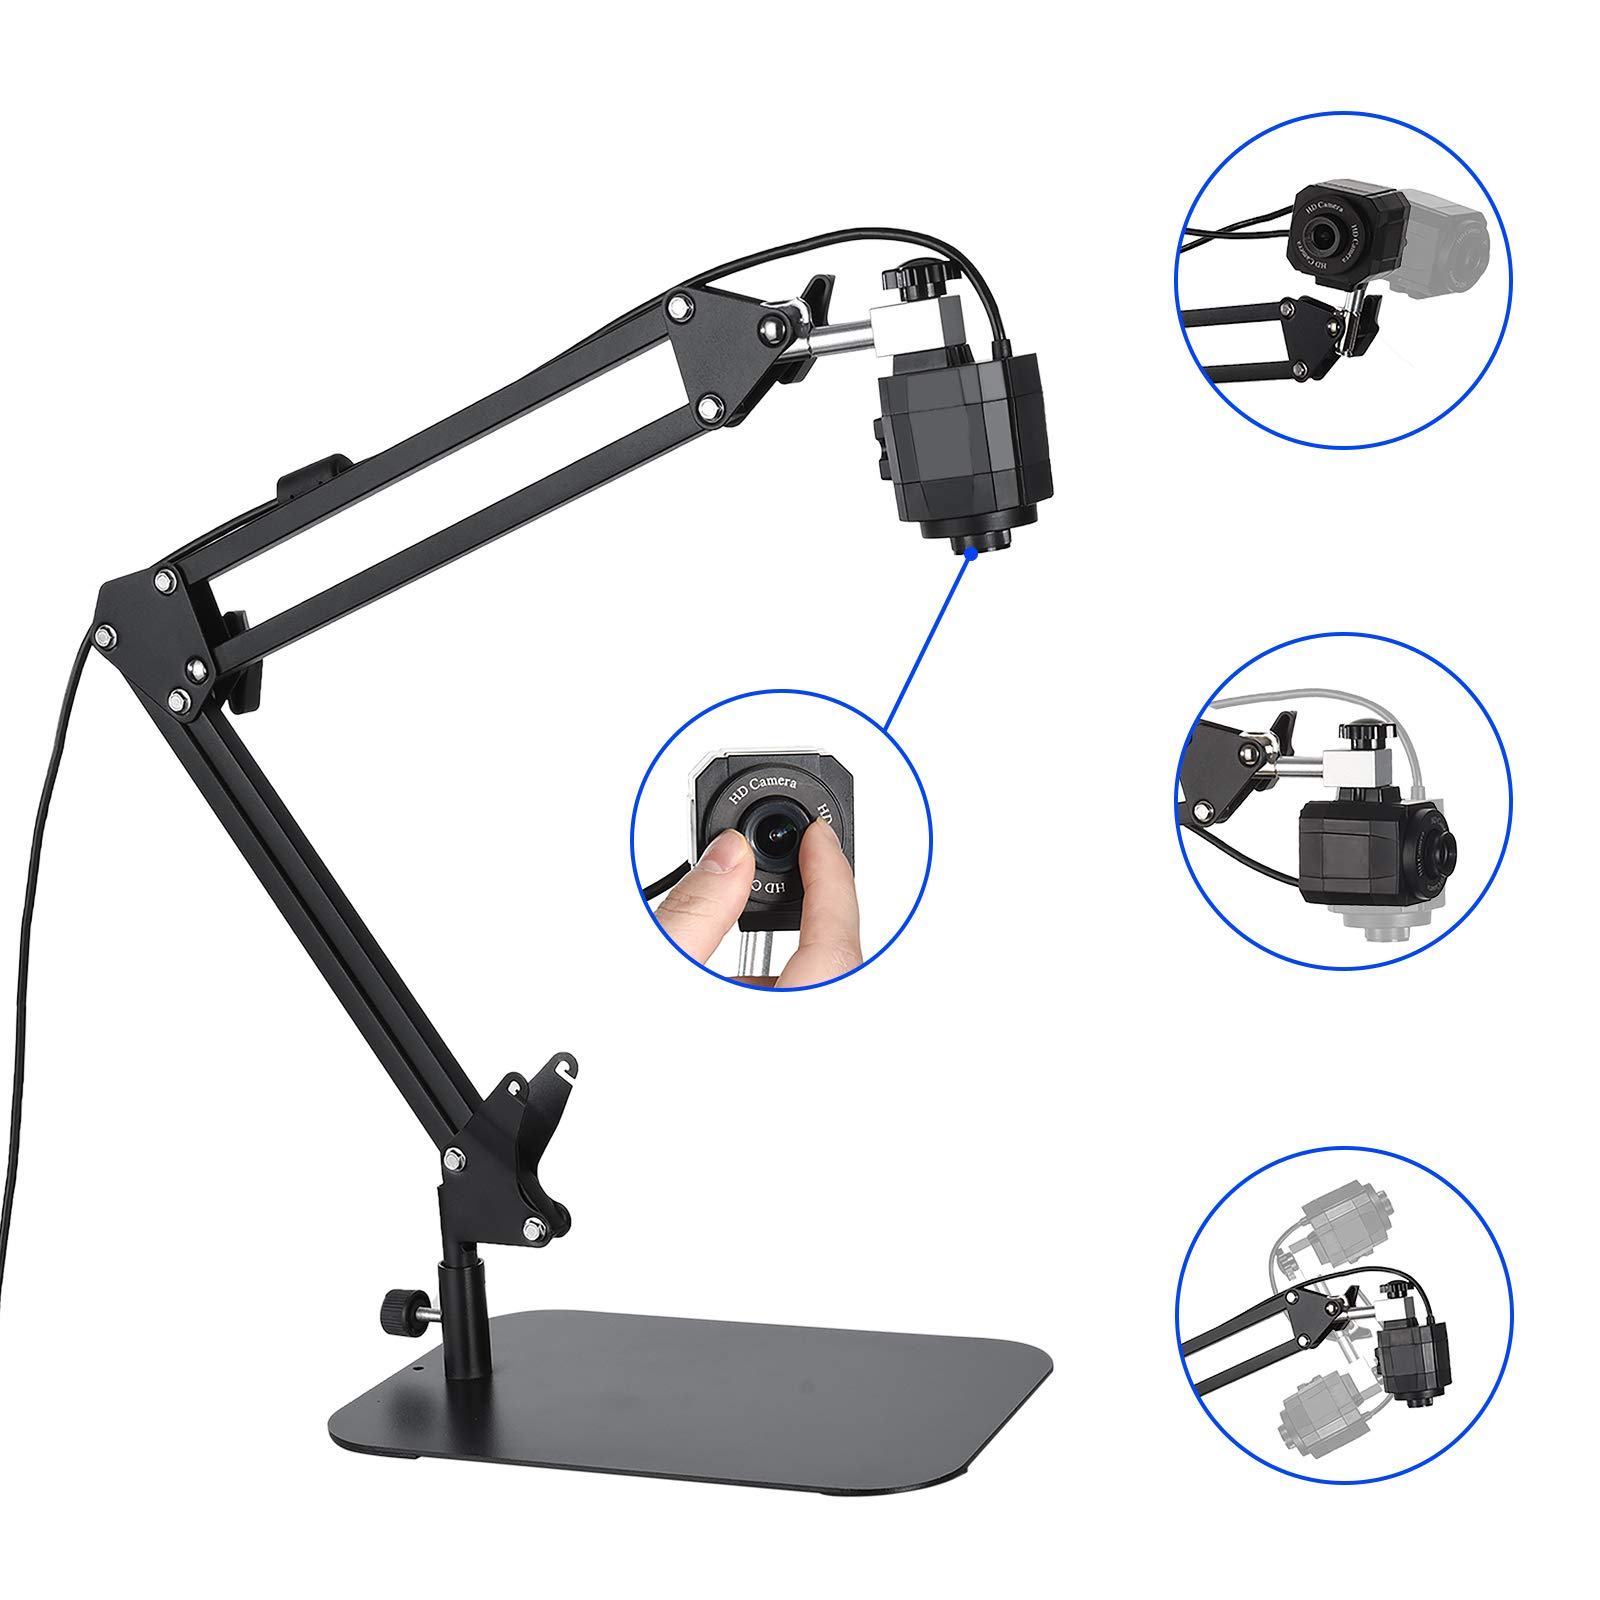 THUSTAND Document Camera for Teaching, USB Webcam for Distance Learning, Video Conferencing, Stop Motion, Time Lapse, Classroom Real-time,Overhead Video Recording, High Definition 1080P